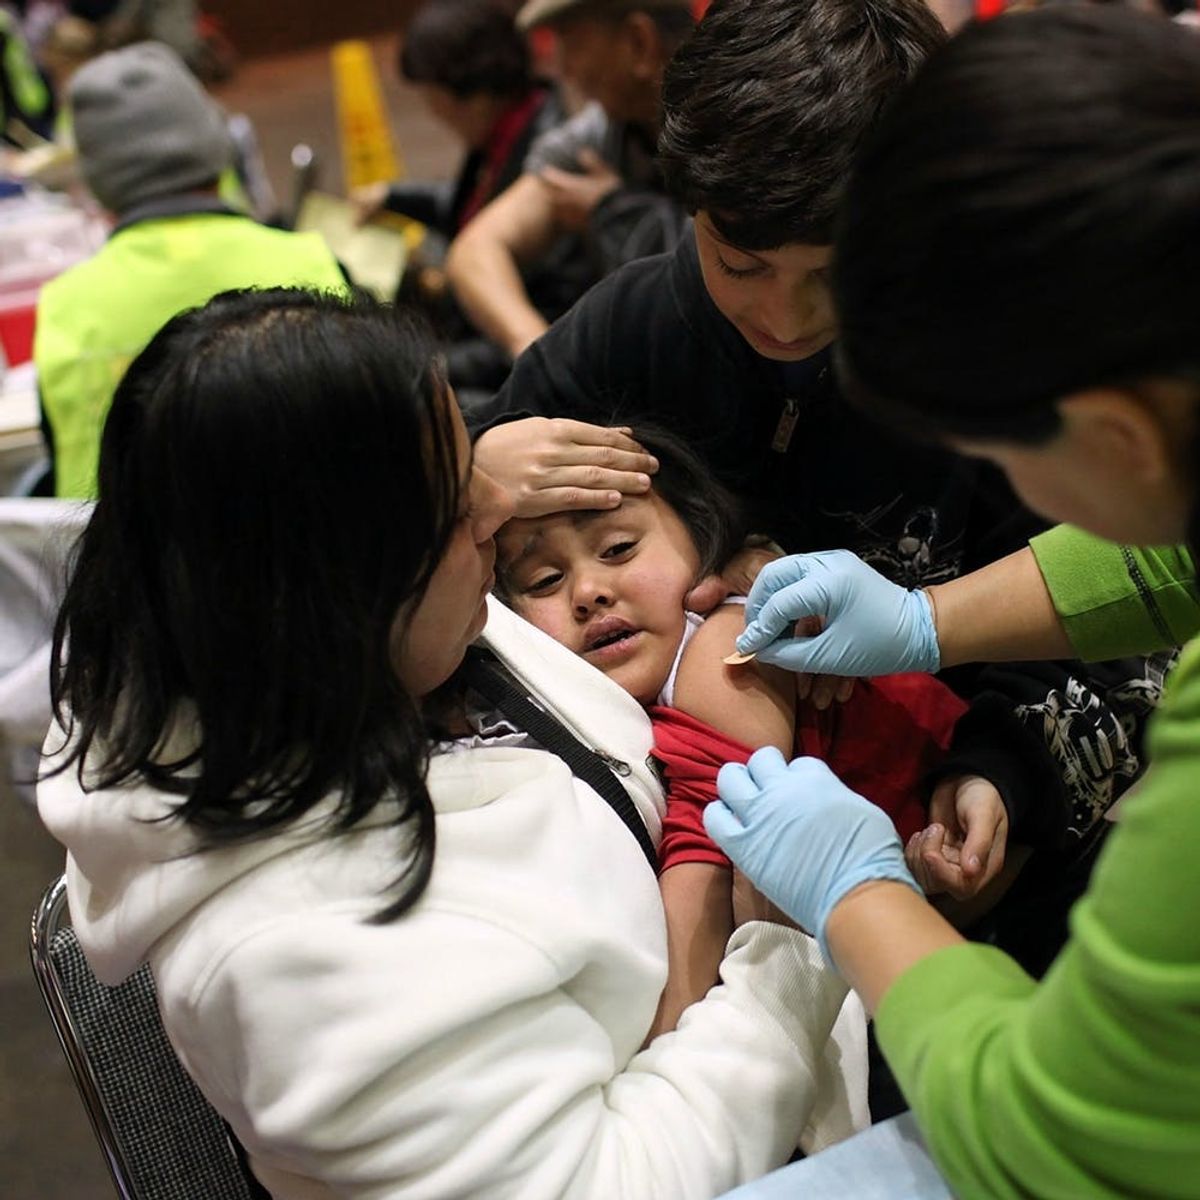 Preventable Diseases Are on the Rise in the US, But Don’t Blame Immigrants